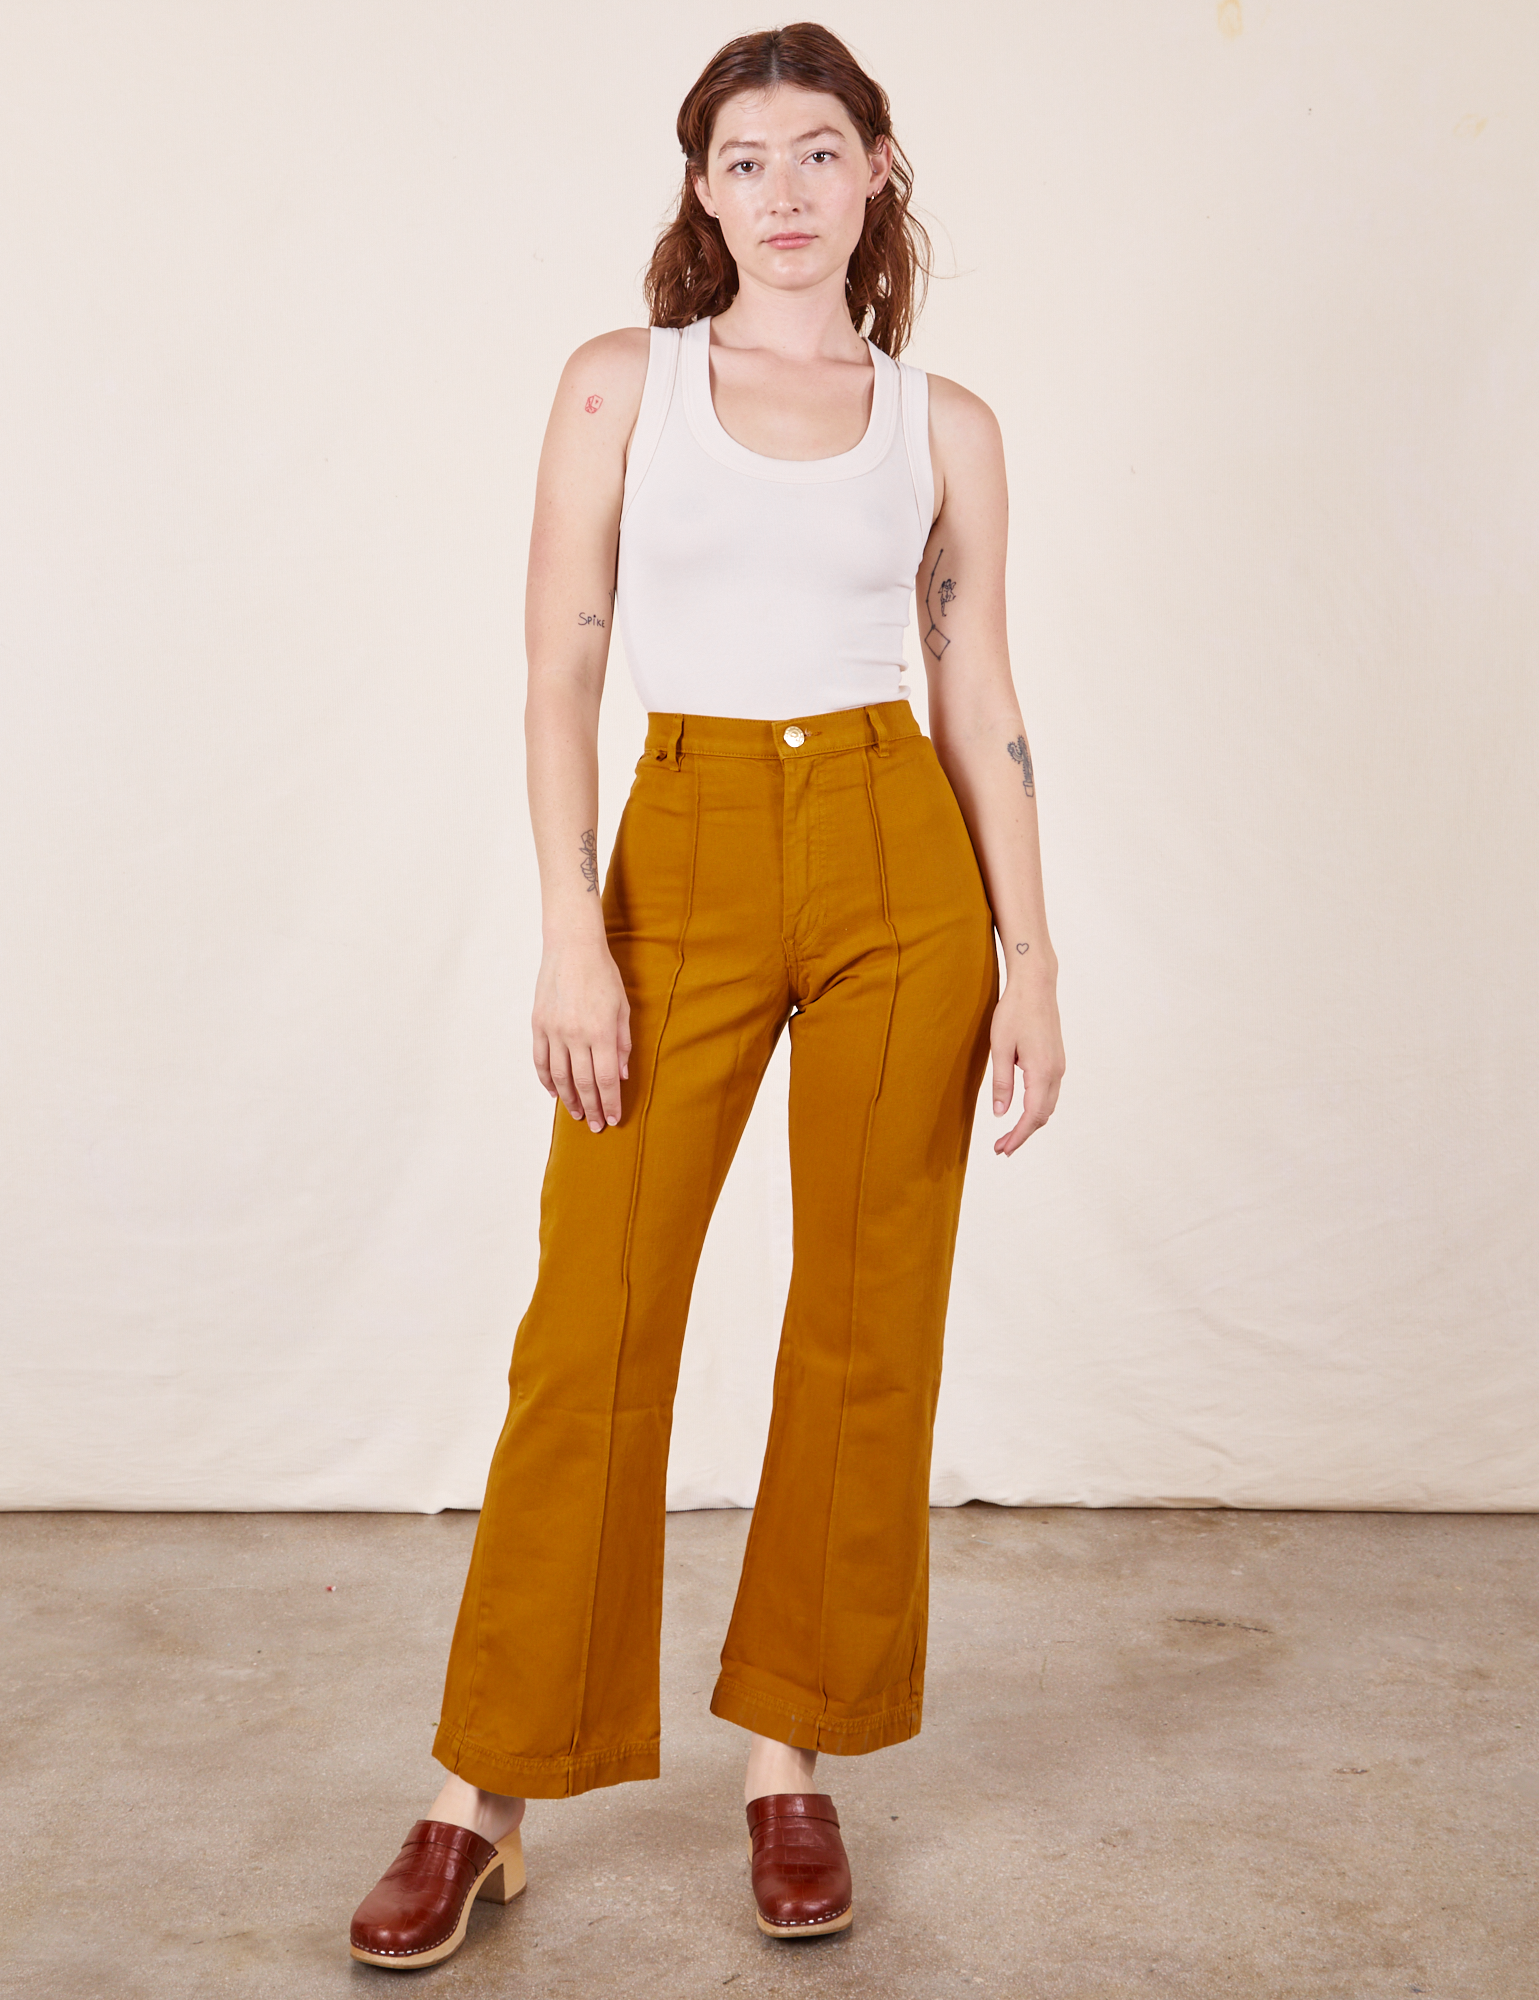 Alex is 5&#39;8&quot; and wearing XS Western Pants in Spicy Mustard paired with vintage off-white Tank Top